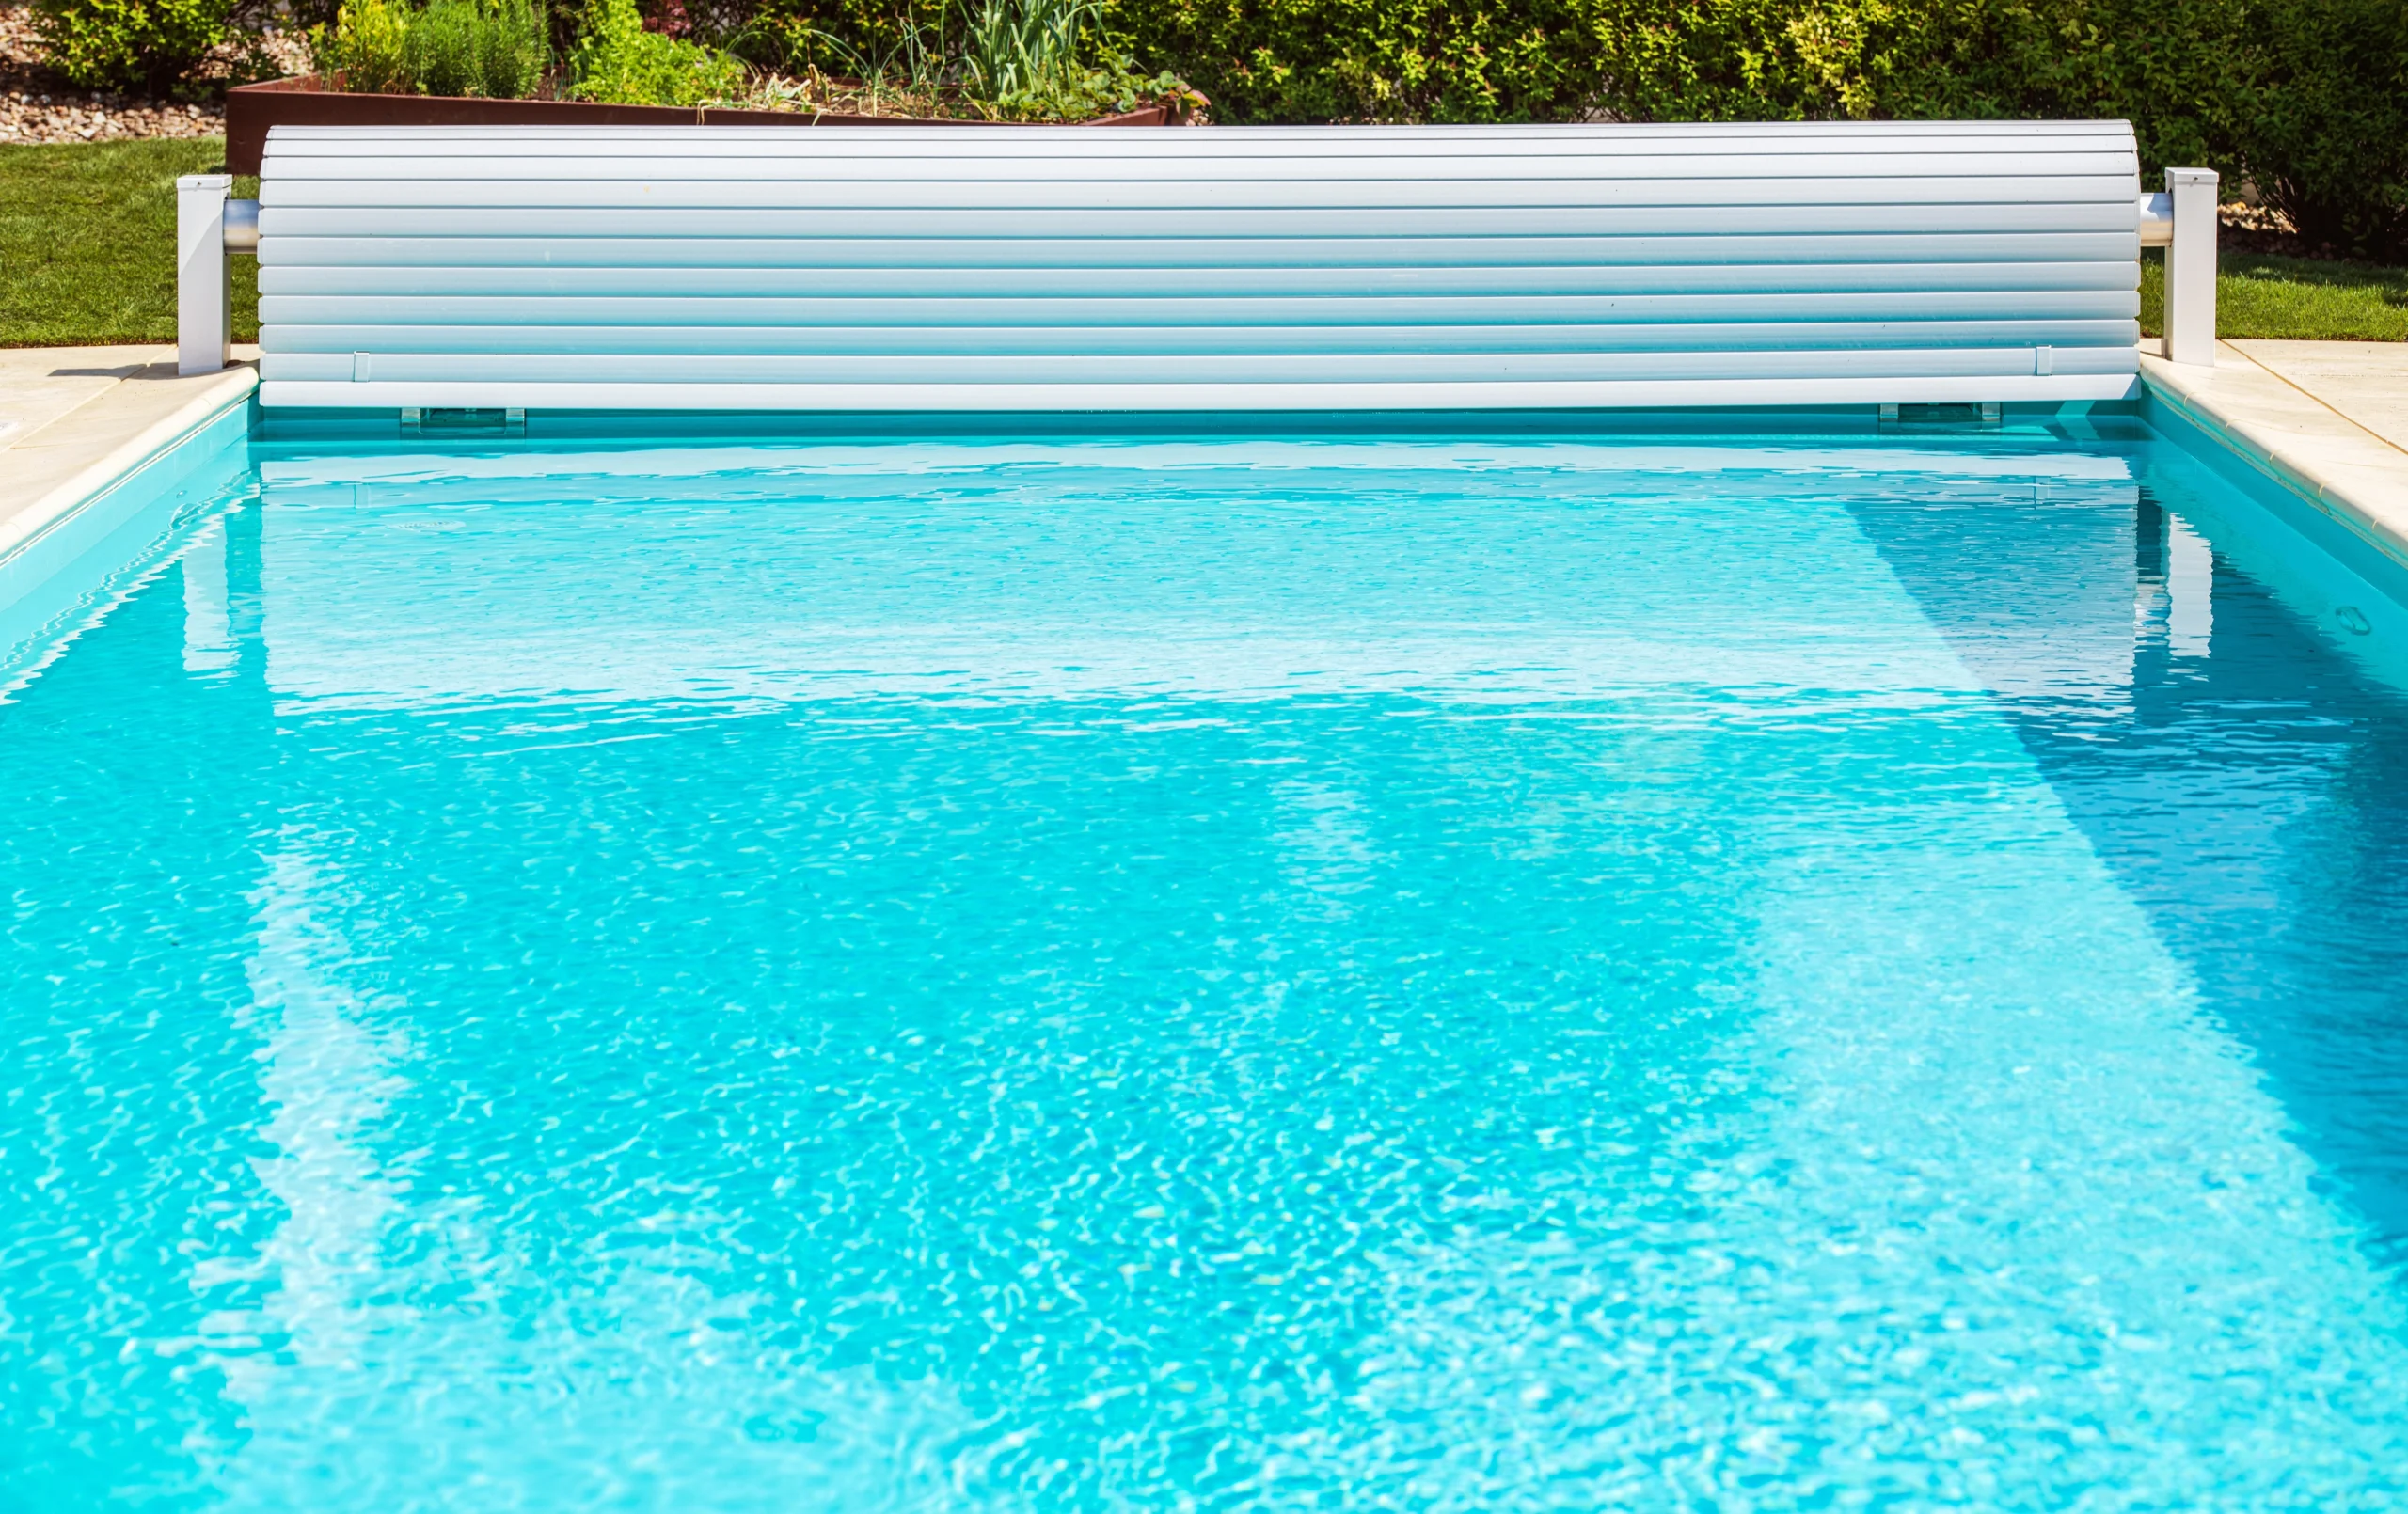 A rectangular outdoor swimming pool with a blue cover partially rolled up at one end, surrounded by a stone deck and greenery in the background, signals the start of opening your pool for the season.